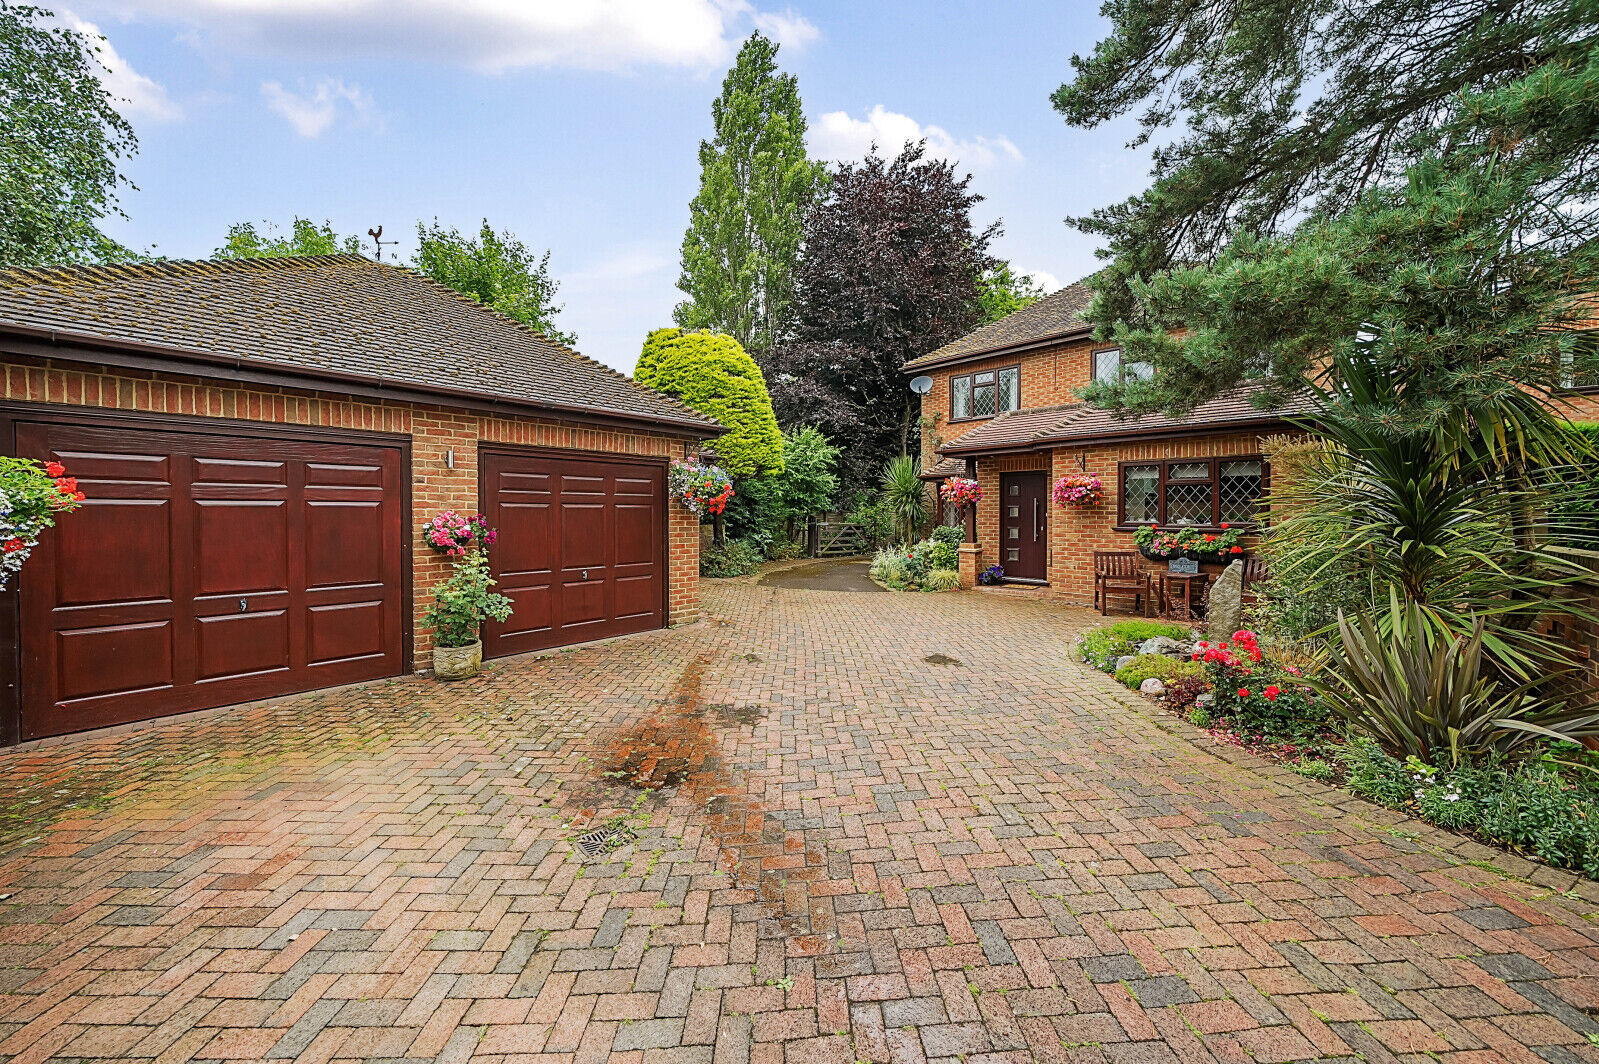 4 bedroom detached house for sale The Pines, Reading, RG10, main image